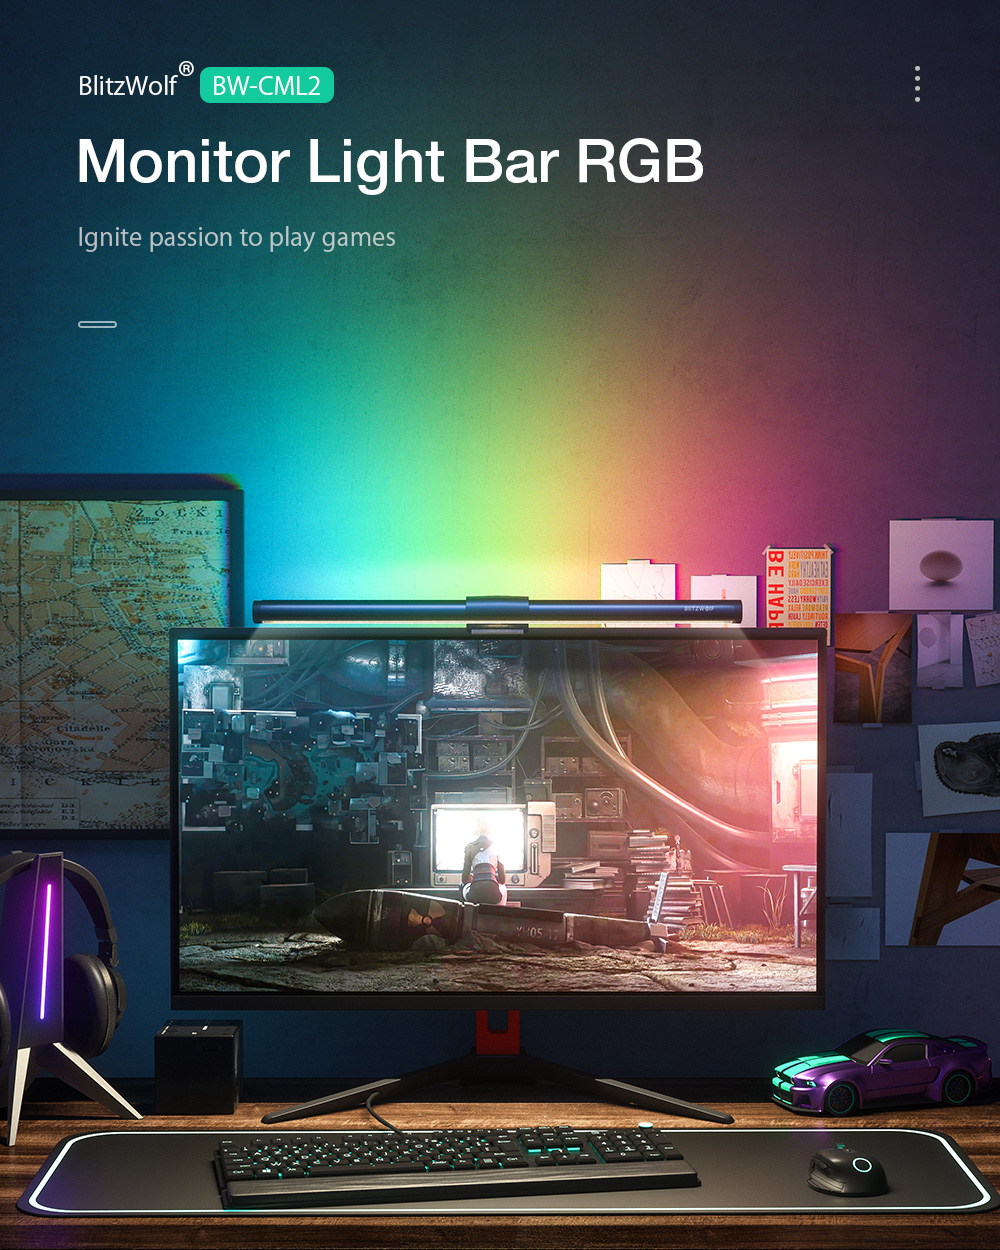 BlitzWolf® BW-CML2 RGB Gaming Monitor Light Bar Dual Light Source 300-1000Lux Adjustable Cool/Mix/Warm Light Color Temperature Eye Protection Anti-Glare USB e-Reading Light Touch Control for Home Office PC Computer